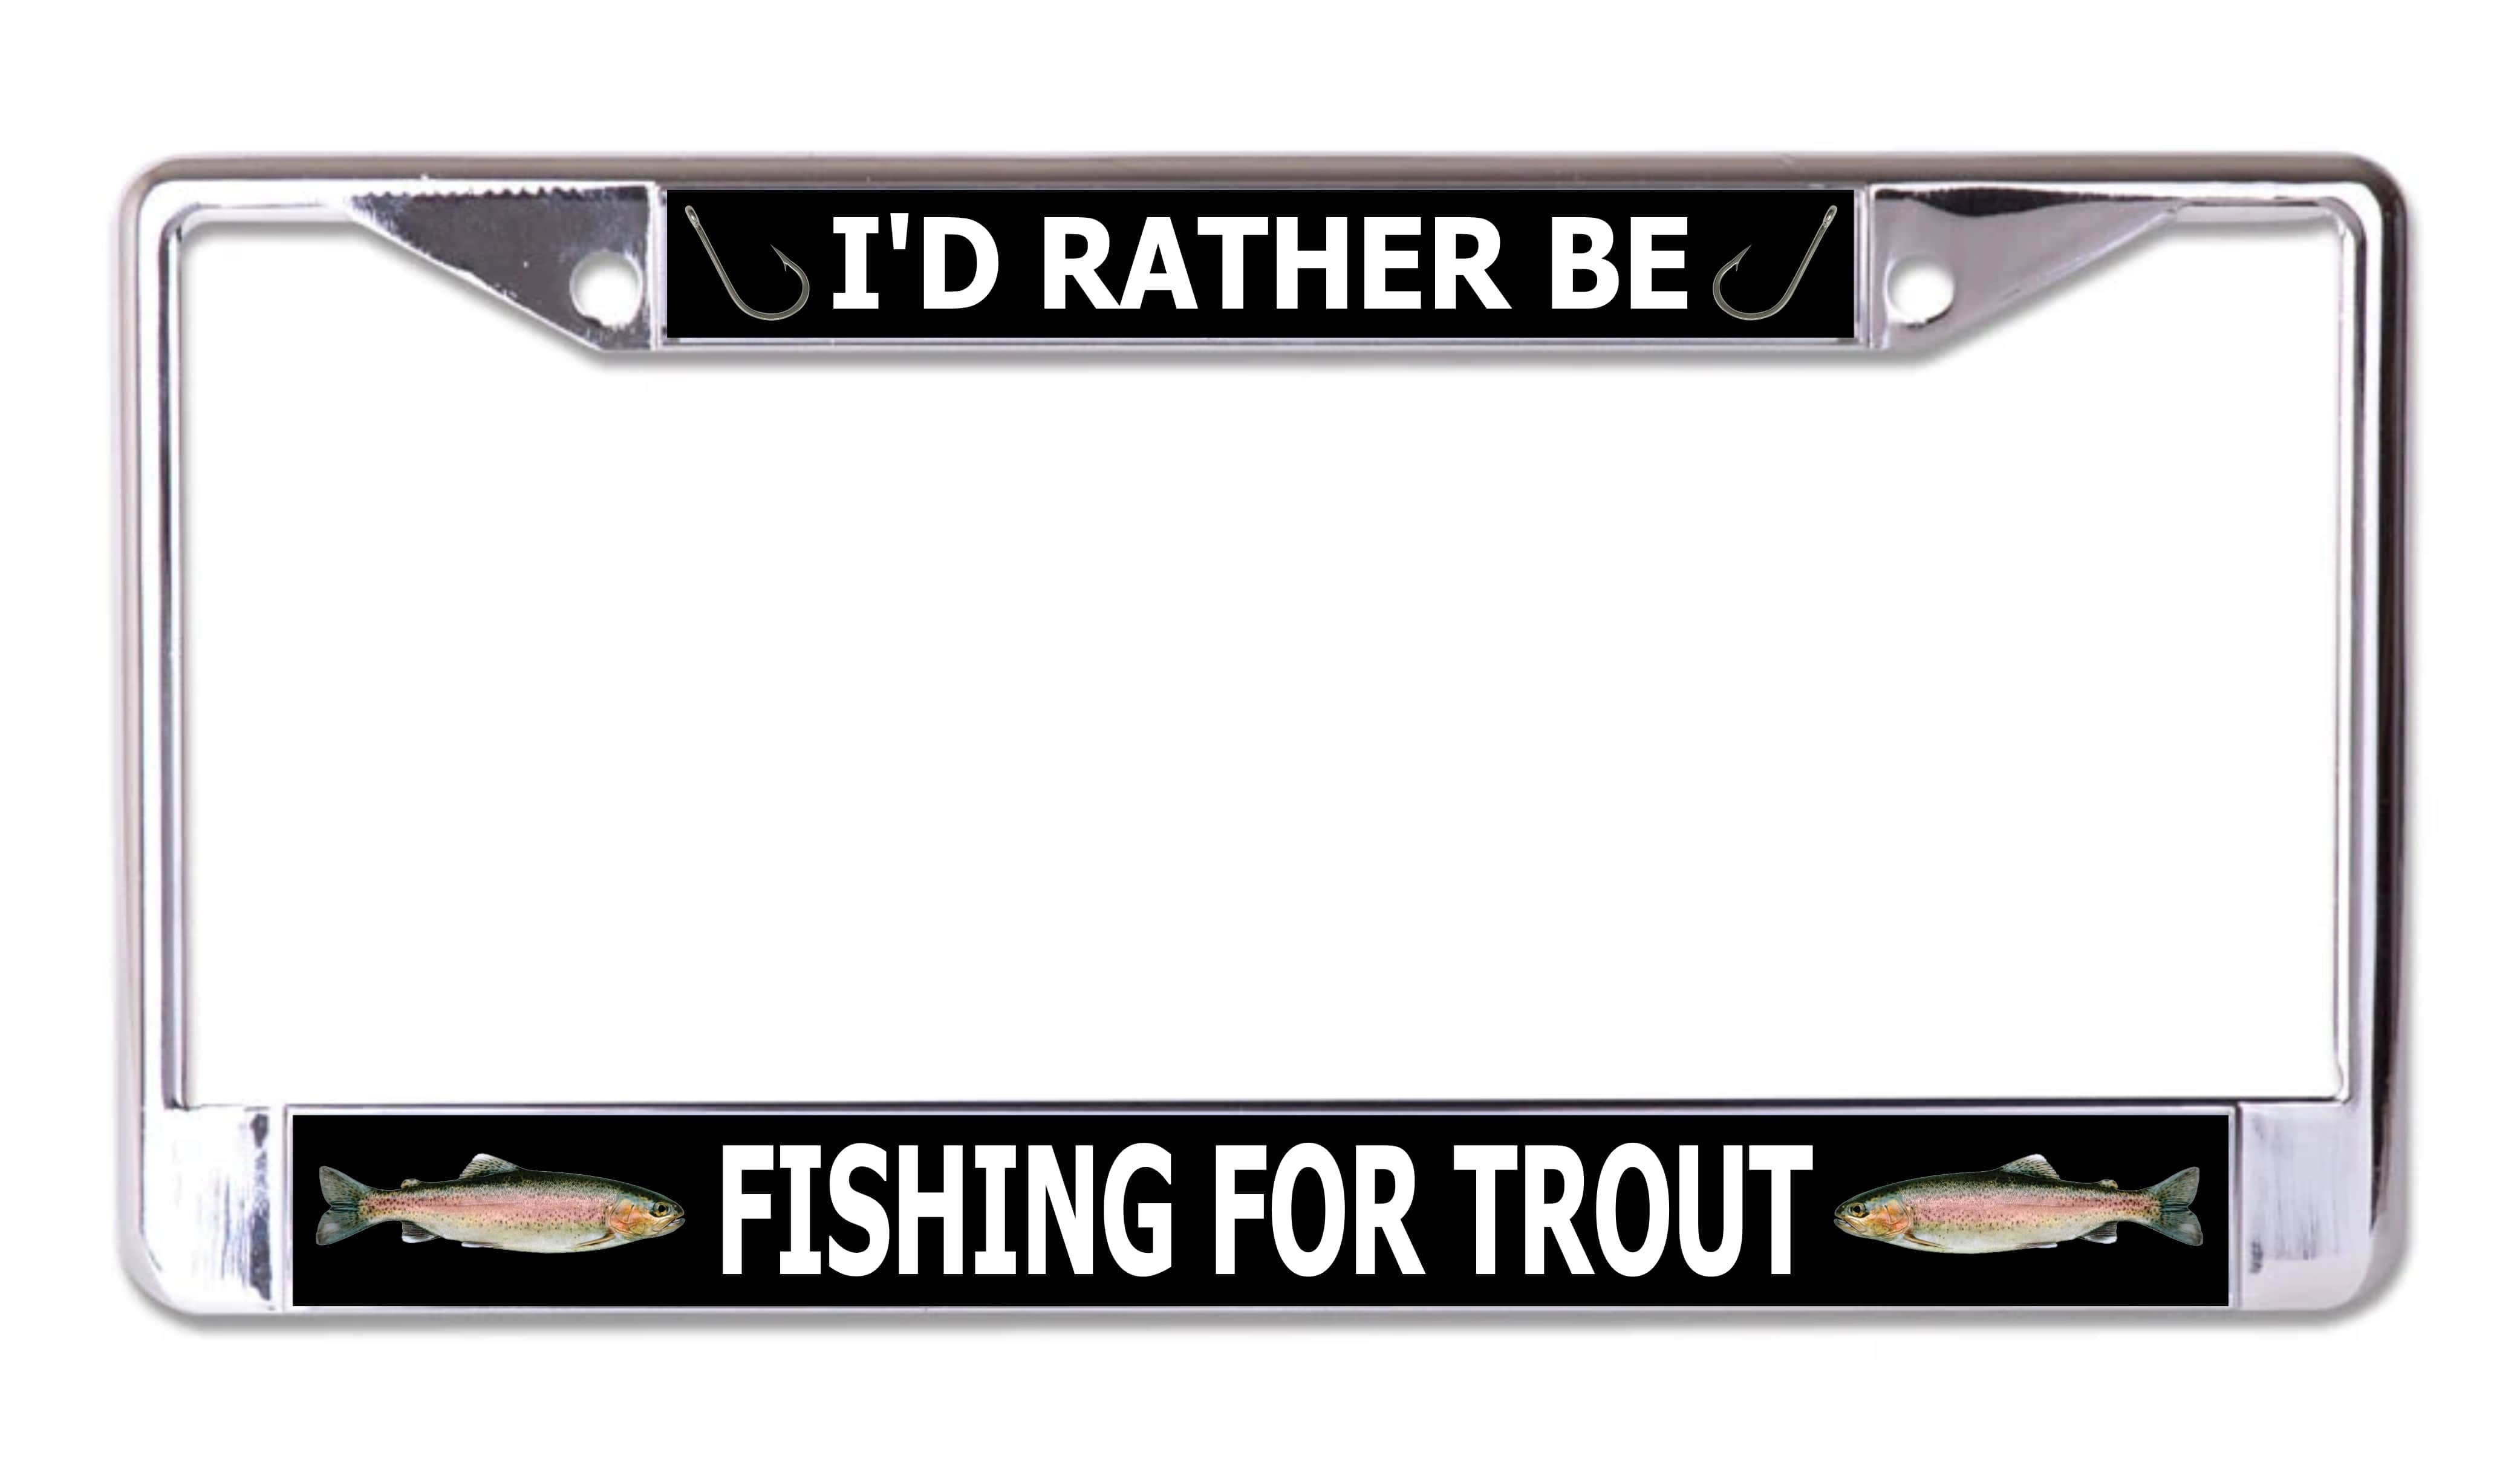 License Plates Online I'd Rather Be Fishing For Trout Chrome License Plate Frame